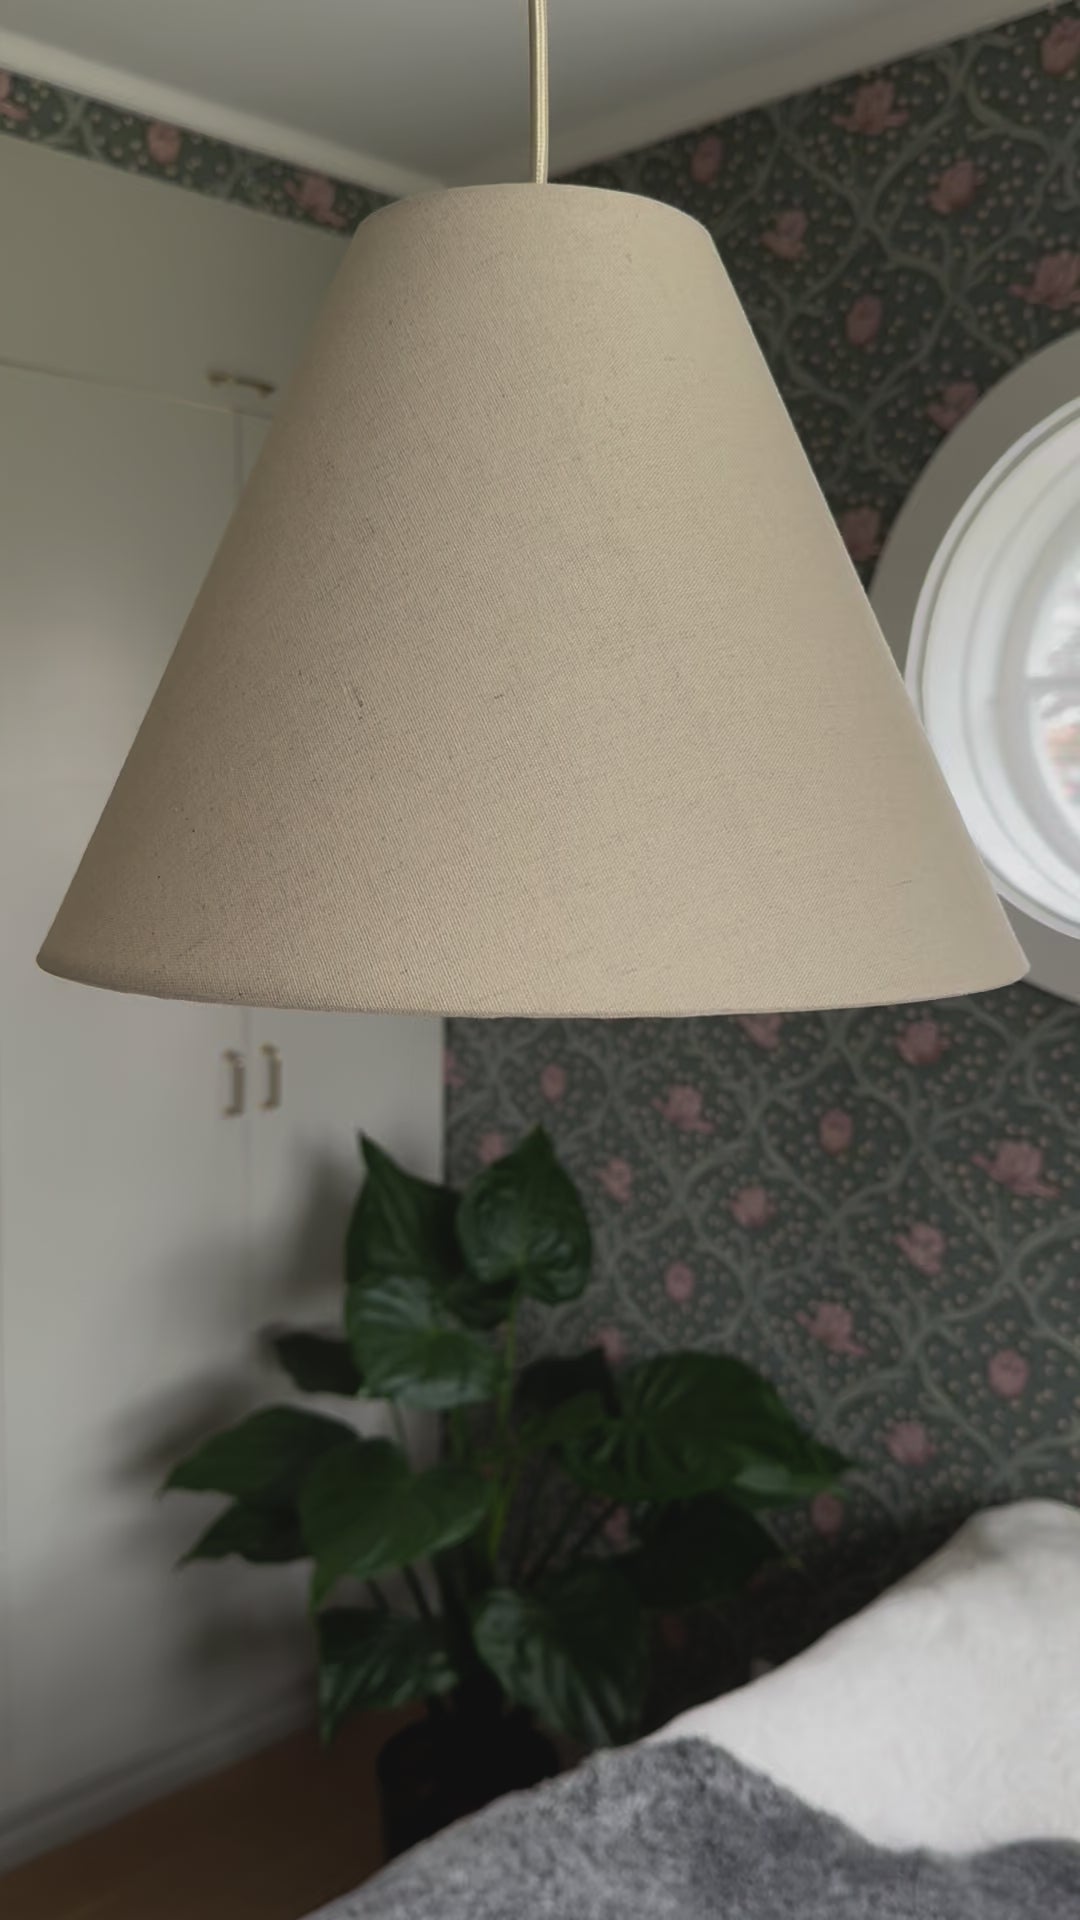 Linen Ceiling Lampshade - Off White - 32 cm